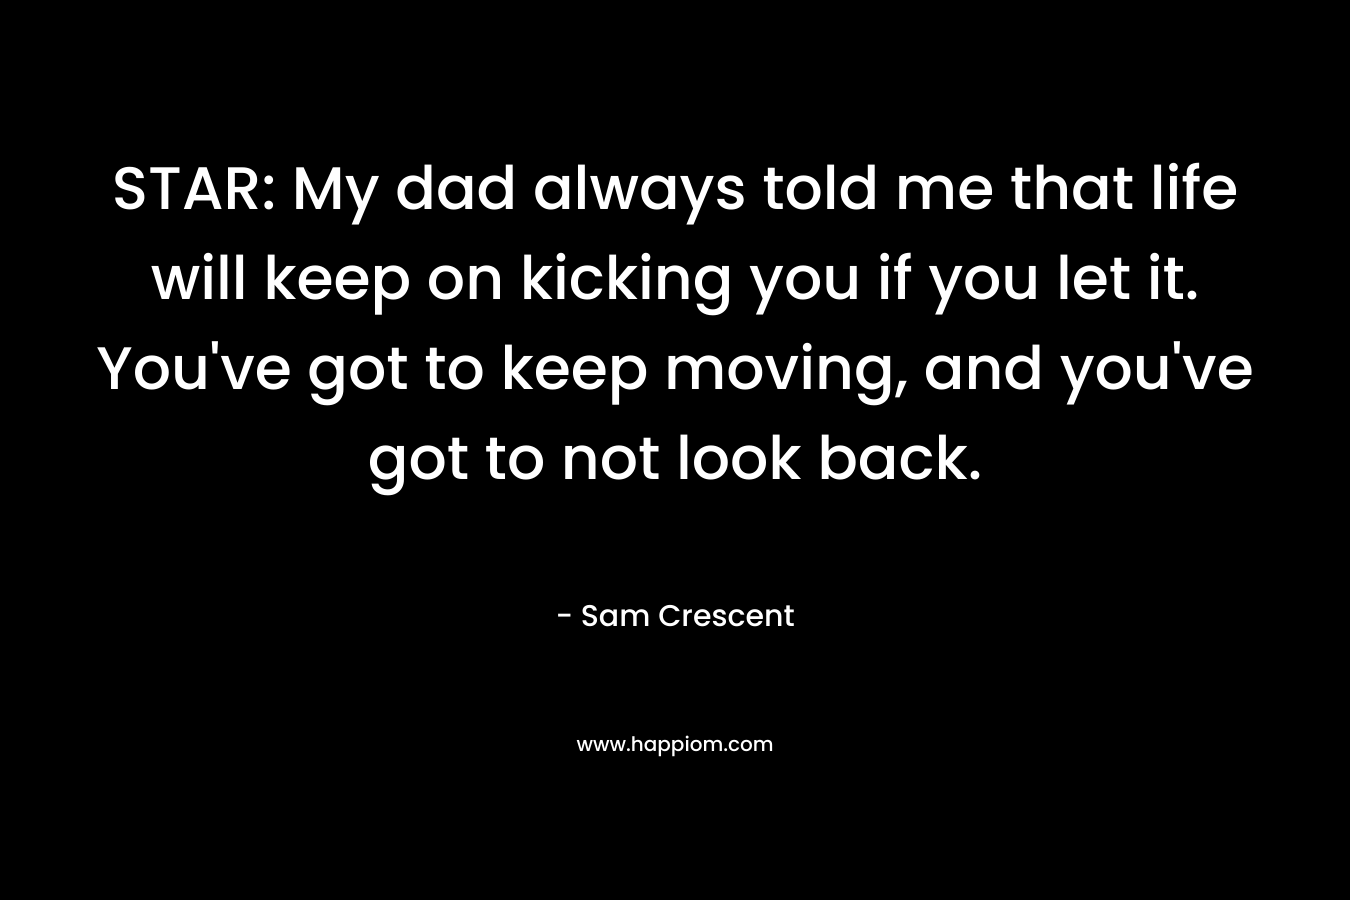 STAR: My dad always told me that life will keep on kicking you if you let it. You’ve got to keep moving, and you’ve got to not look back. – Sam Crescent